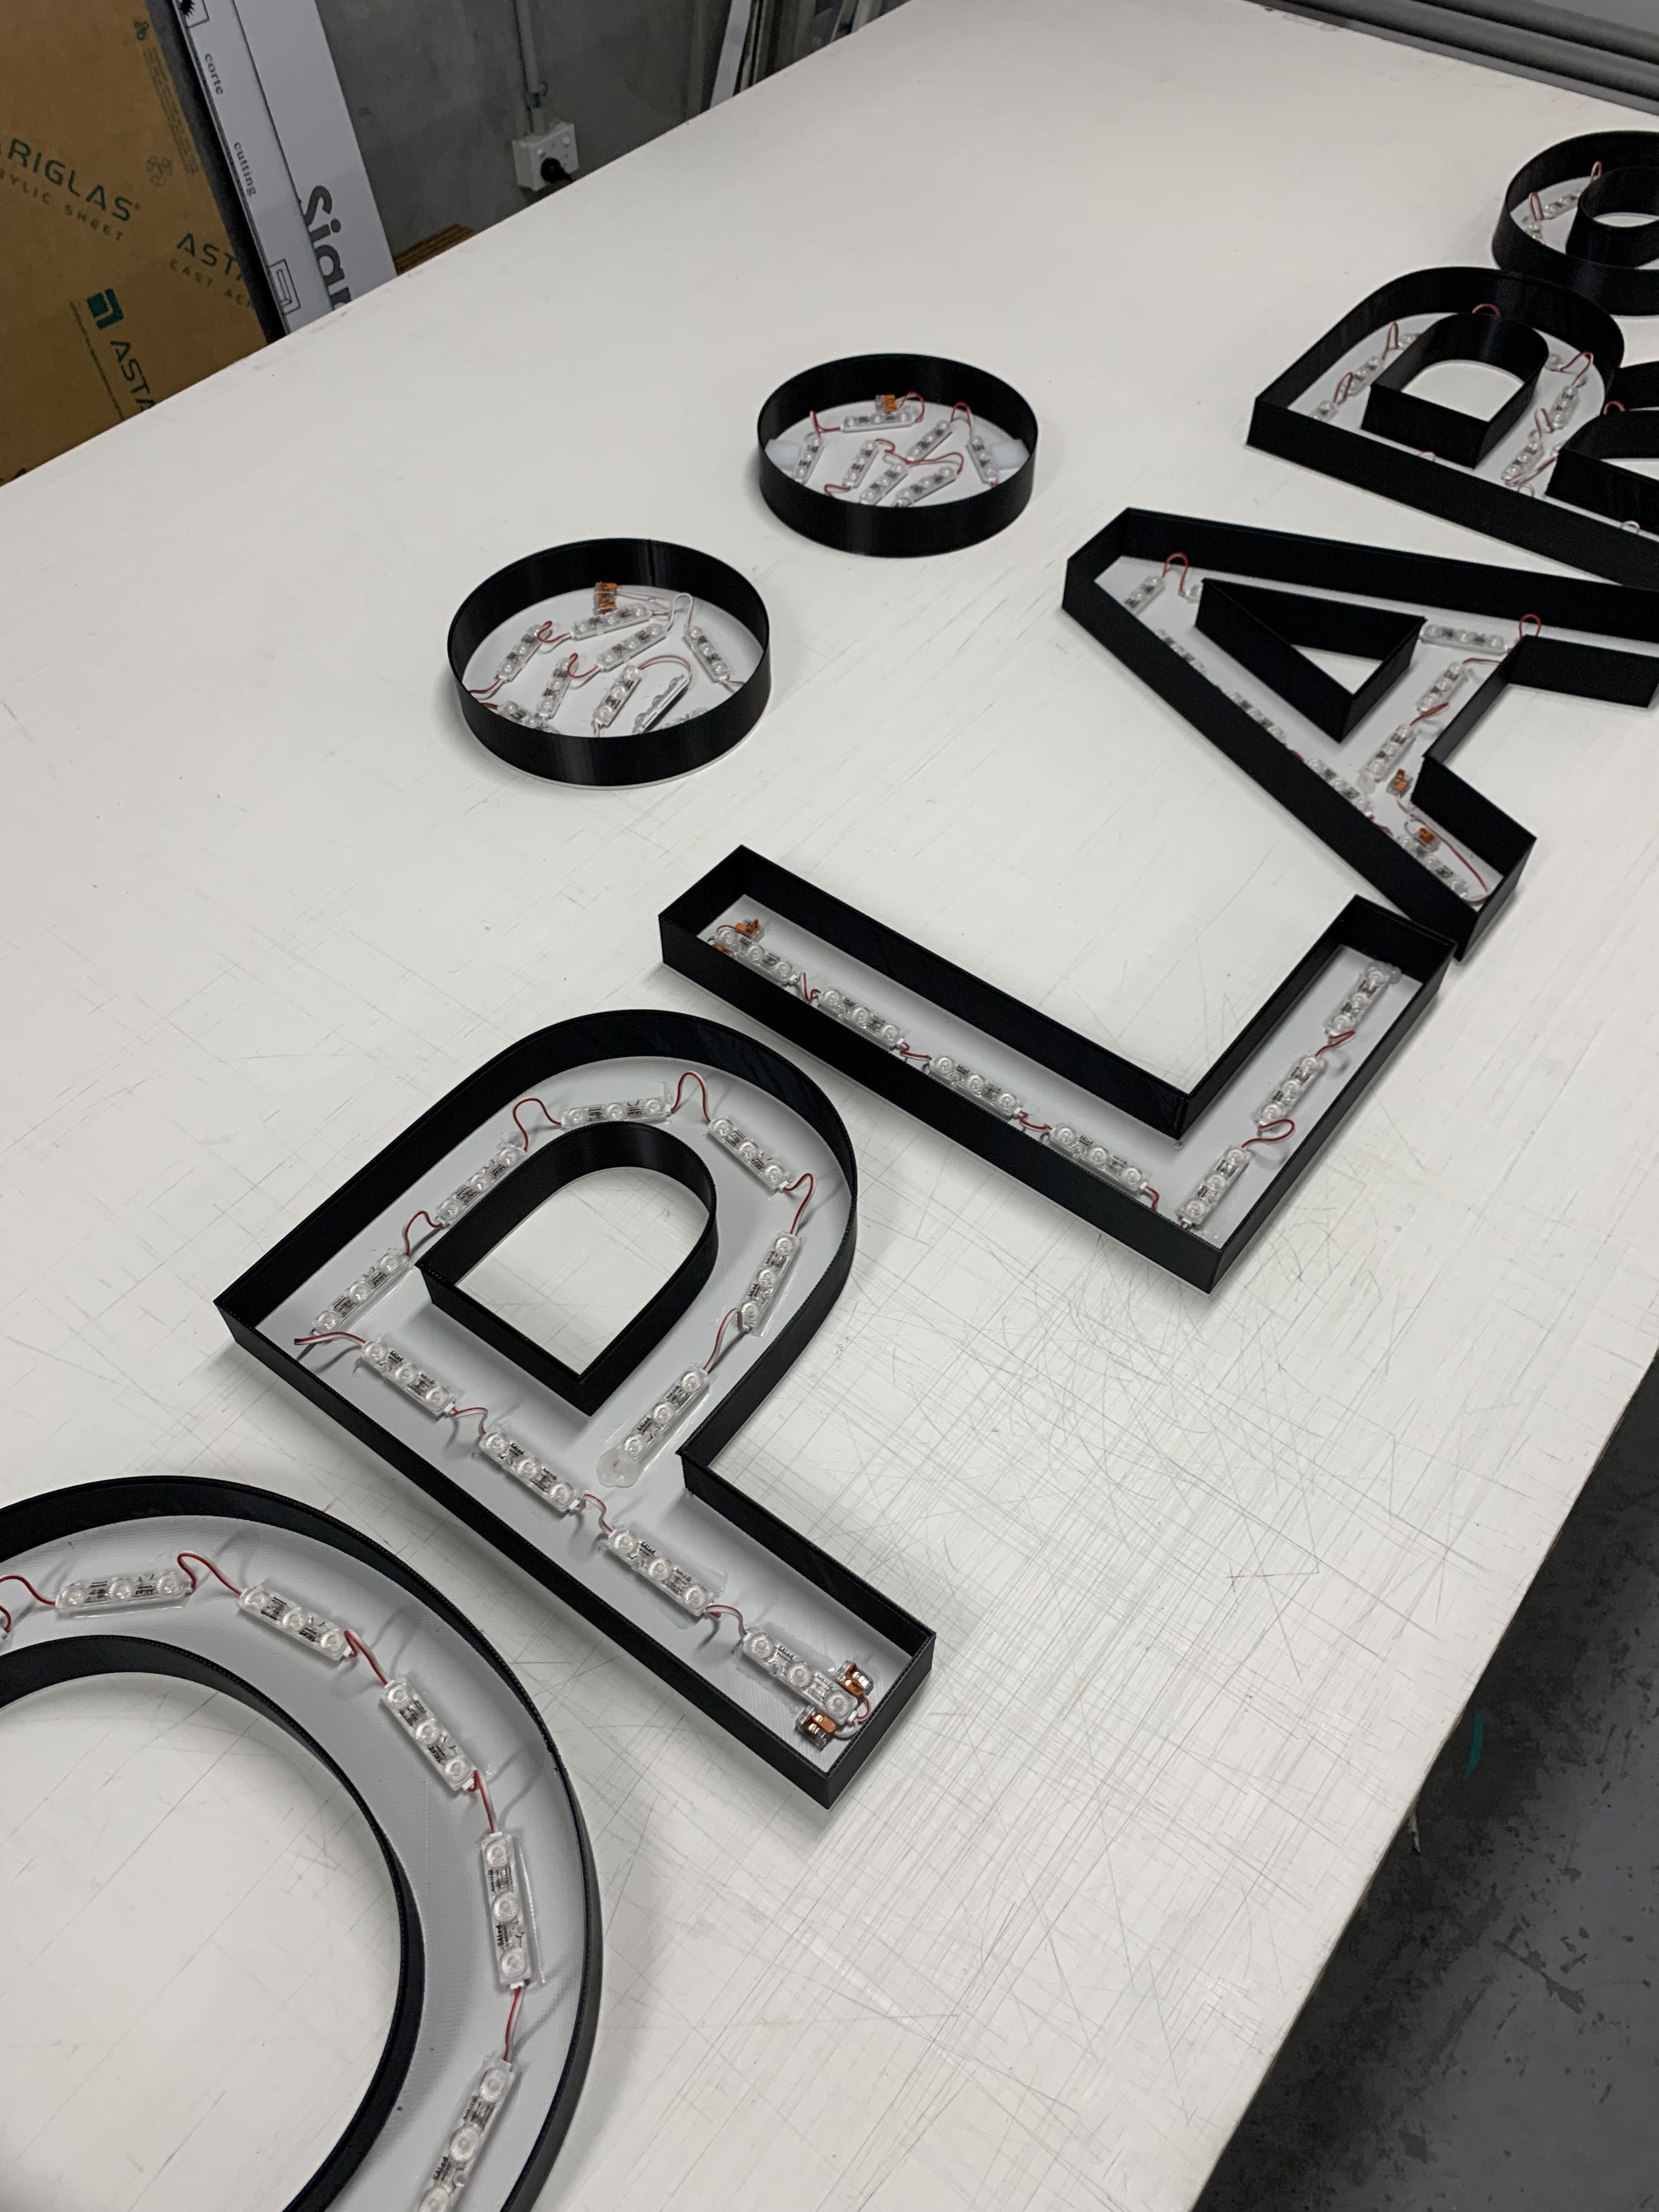 Illuminated 3D Printed Letters